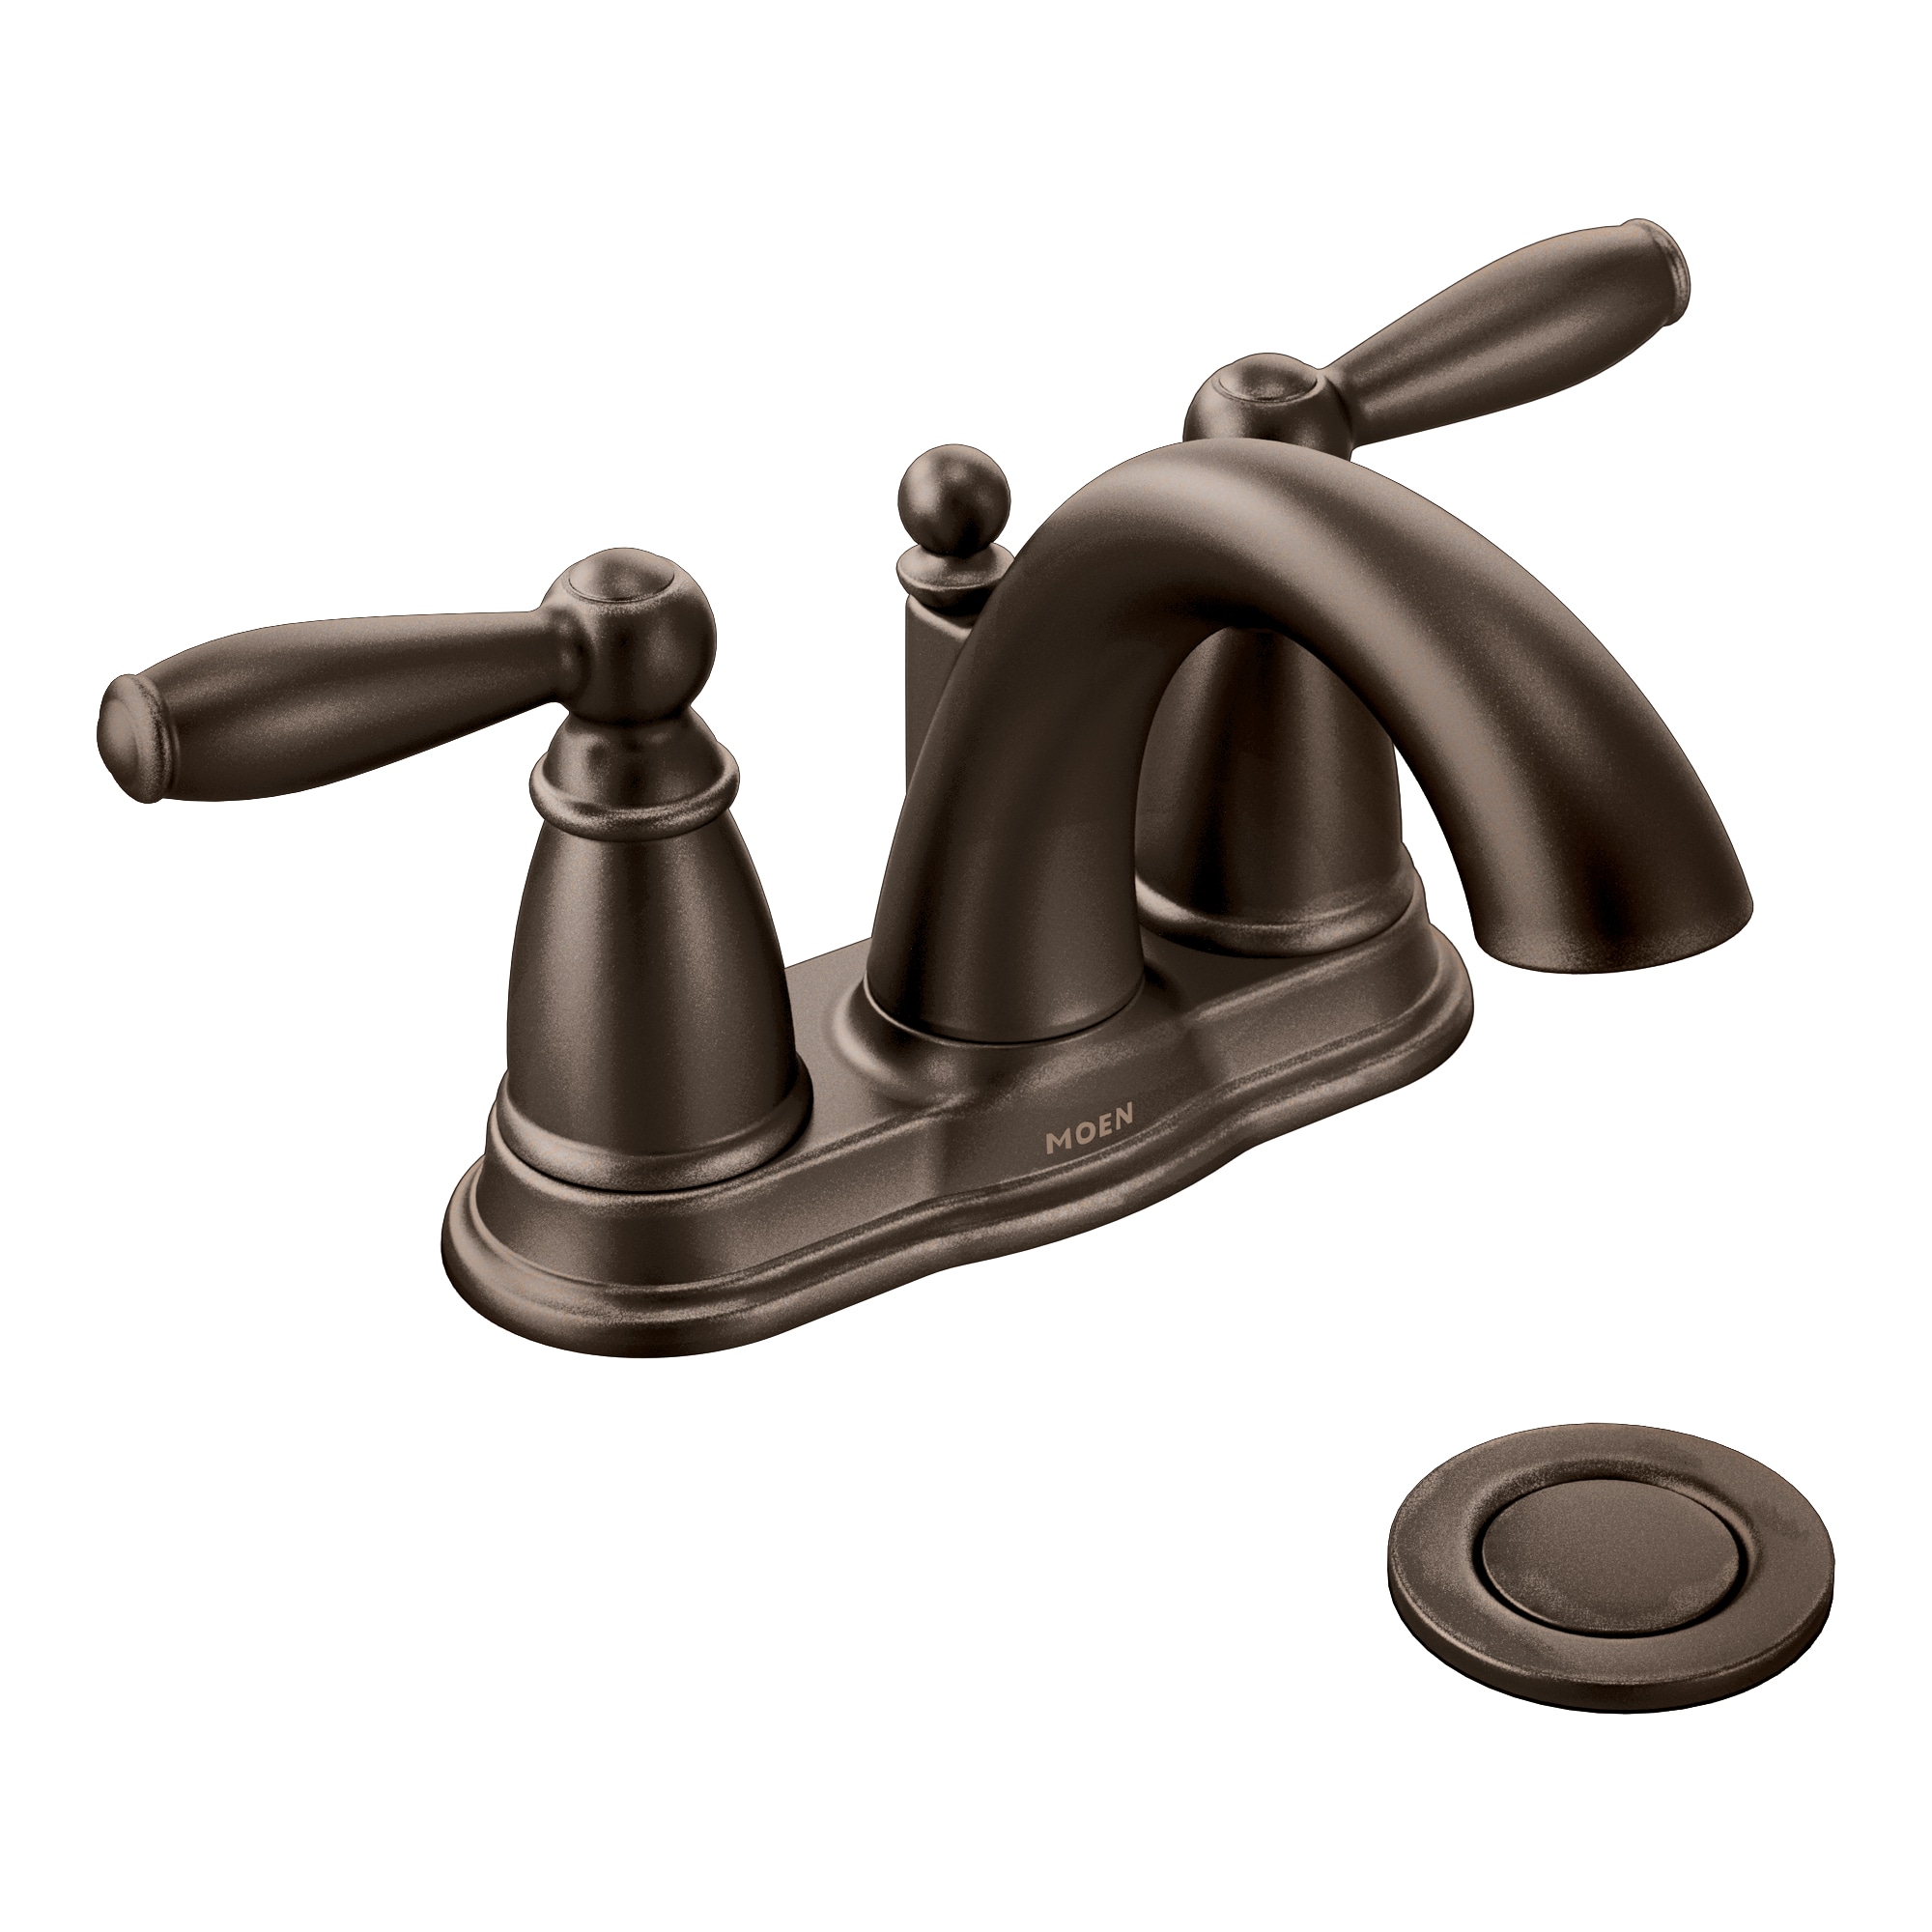 Oil Rubbed Bronze Centerset Bathroom Faucet with Matching Pop-up Drain 